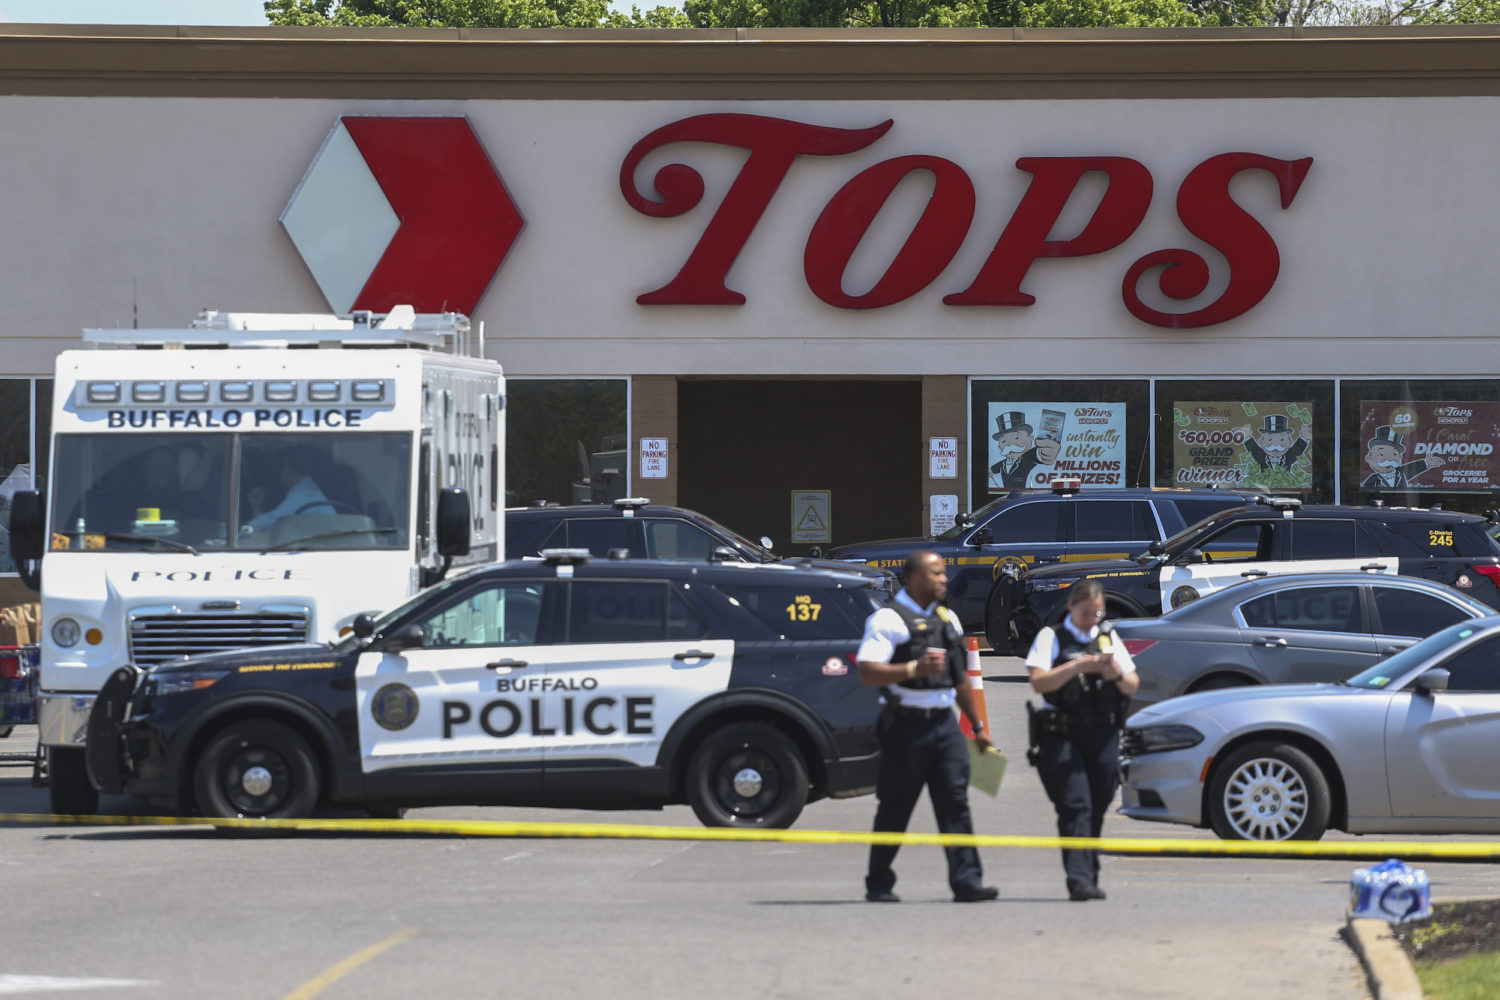 No, this news interview doesn’t prove the Buffalo supermarket shooting was staged - Poynter